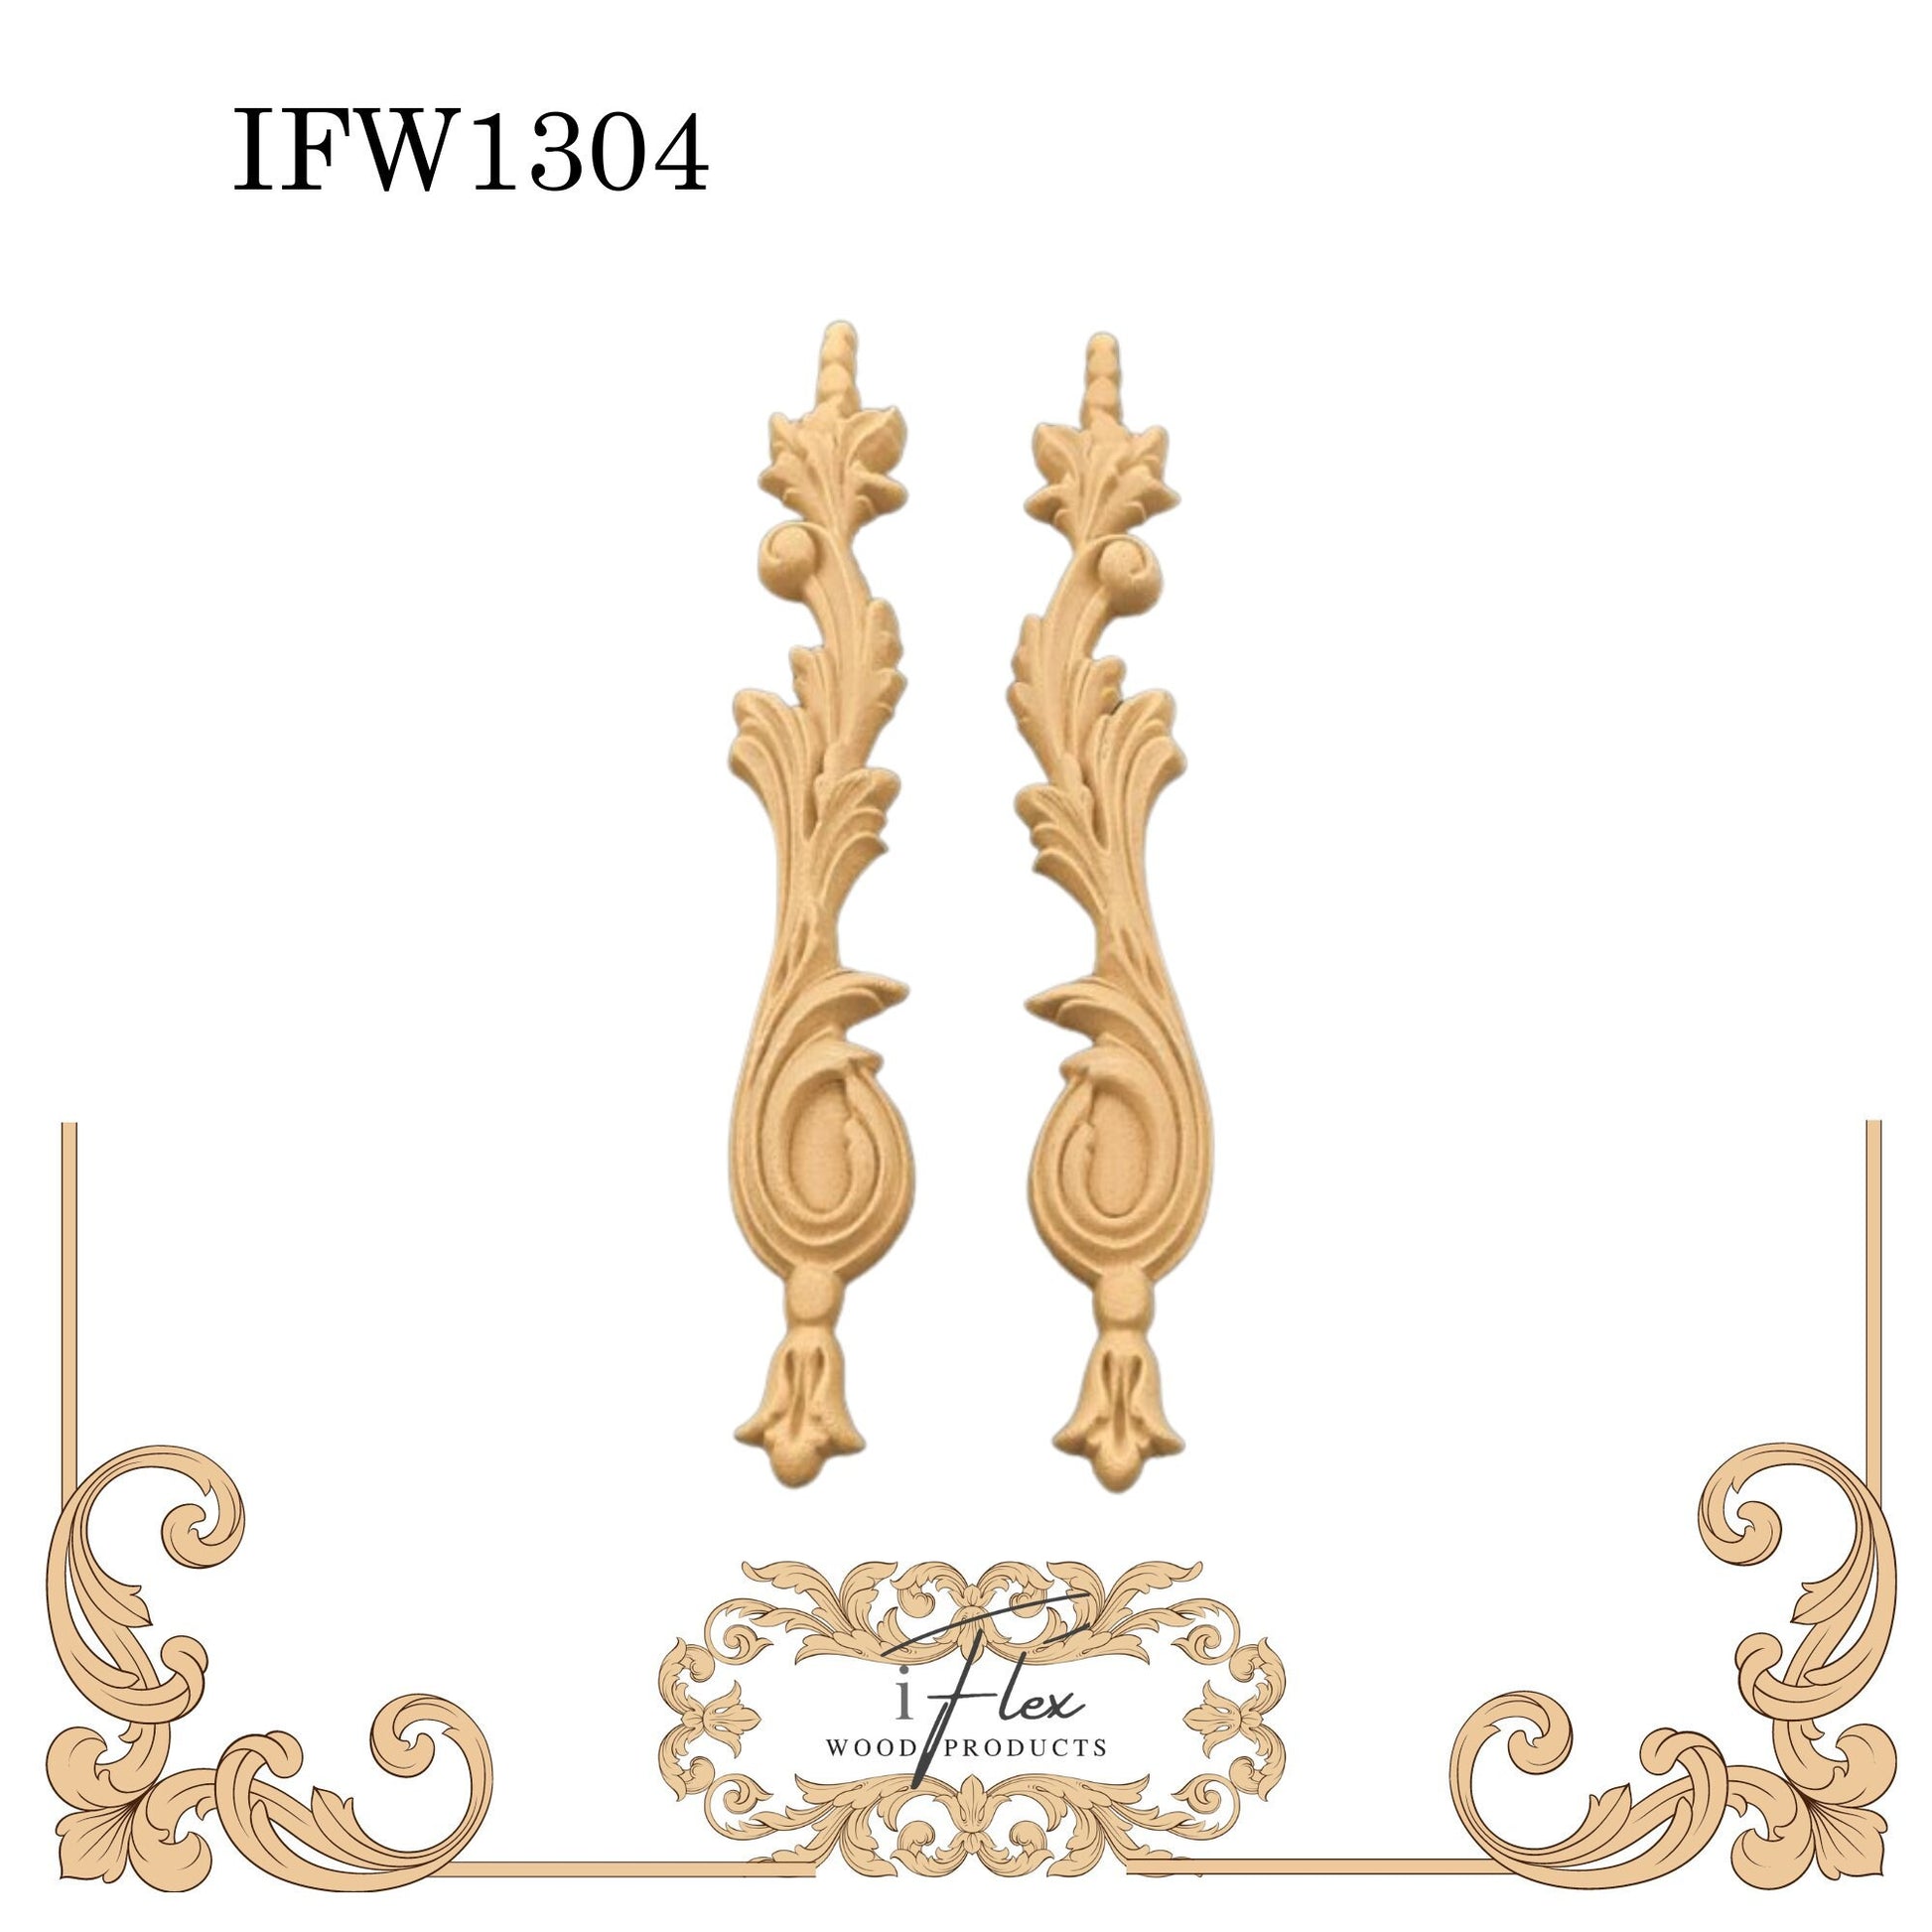 IFW 1304 iFlex Wood Products, bendable mouldings, flexible, wooden appliques, drops pair